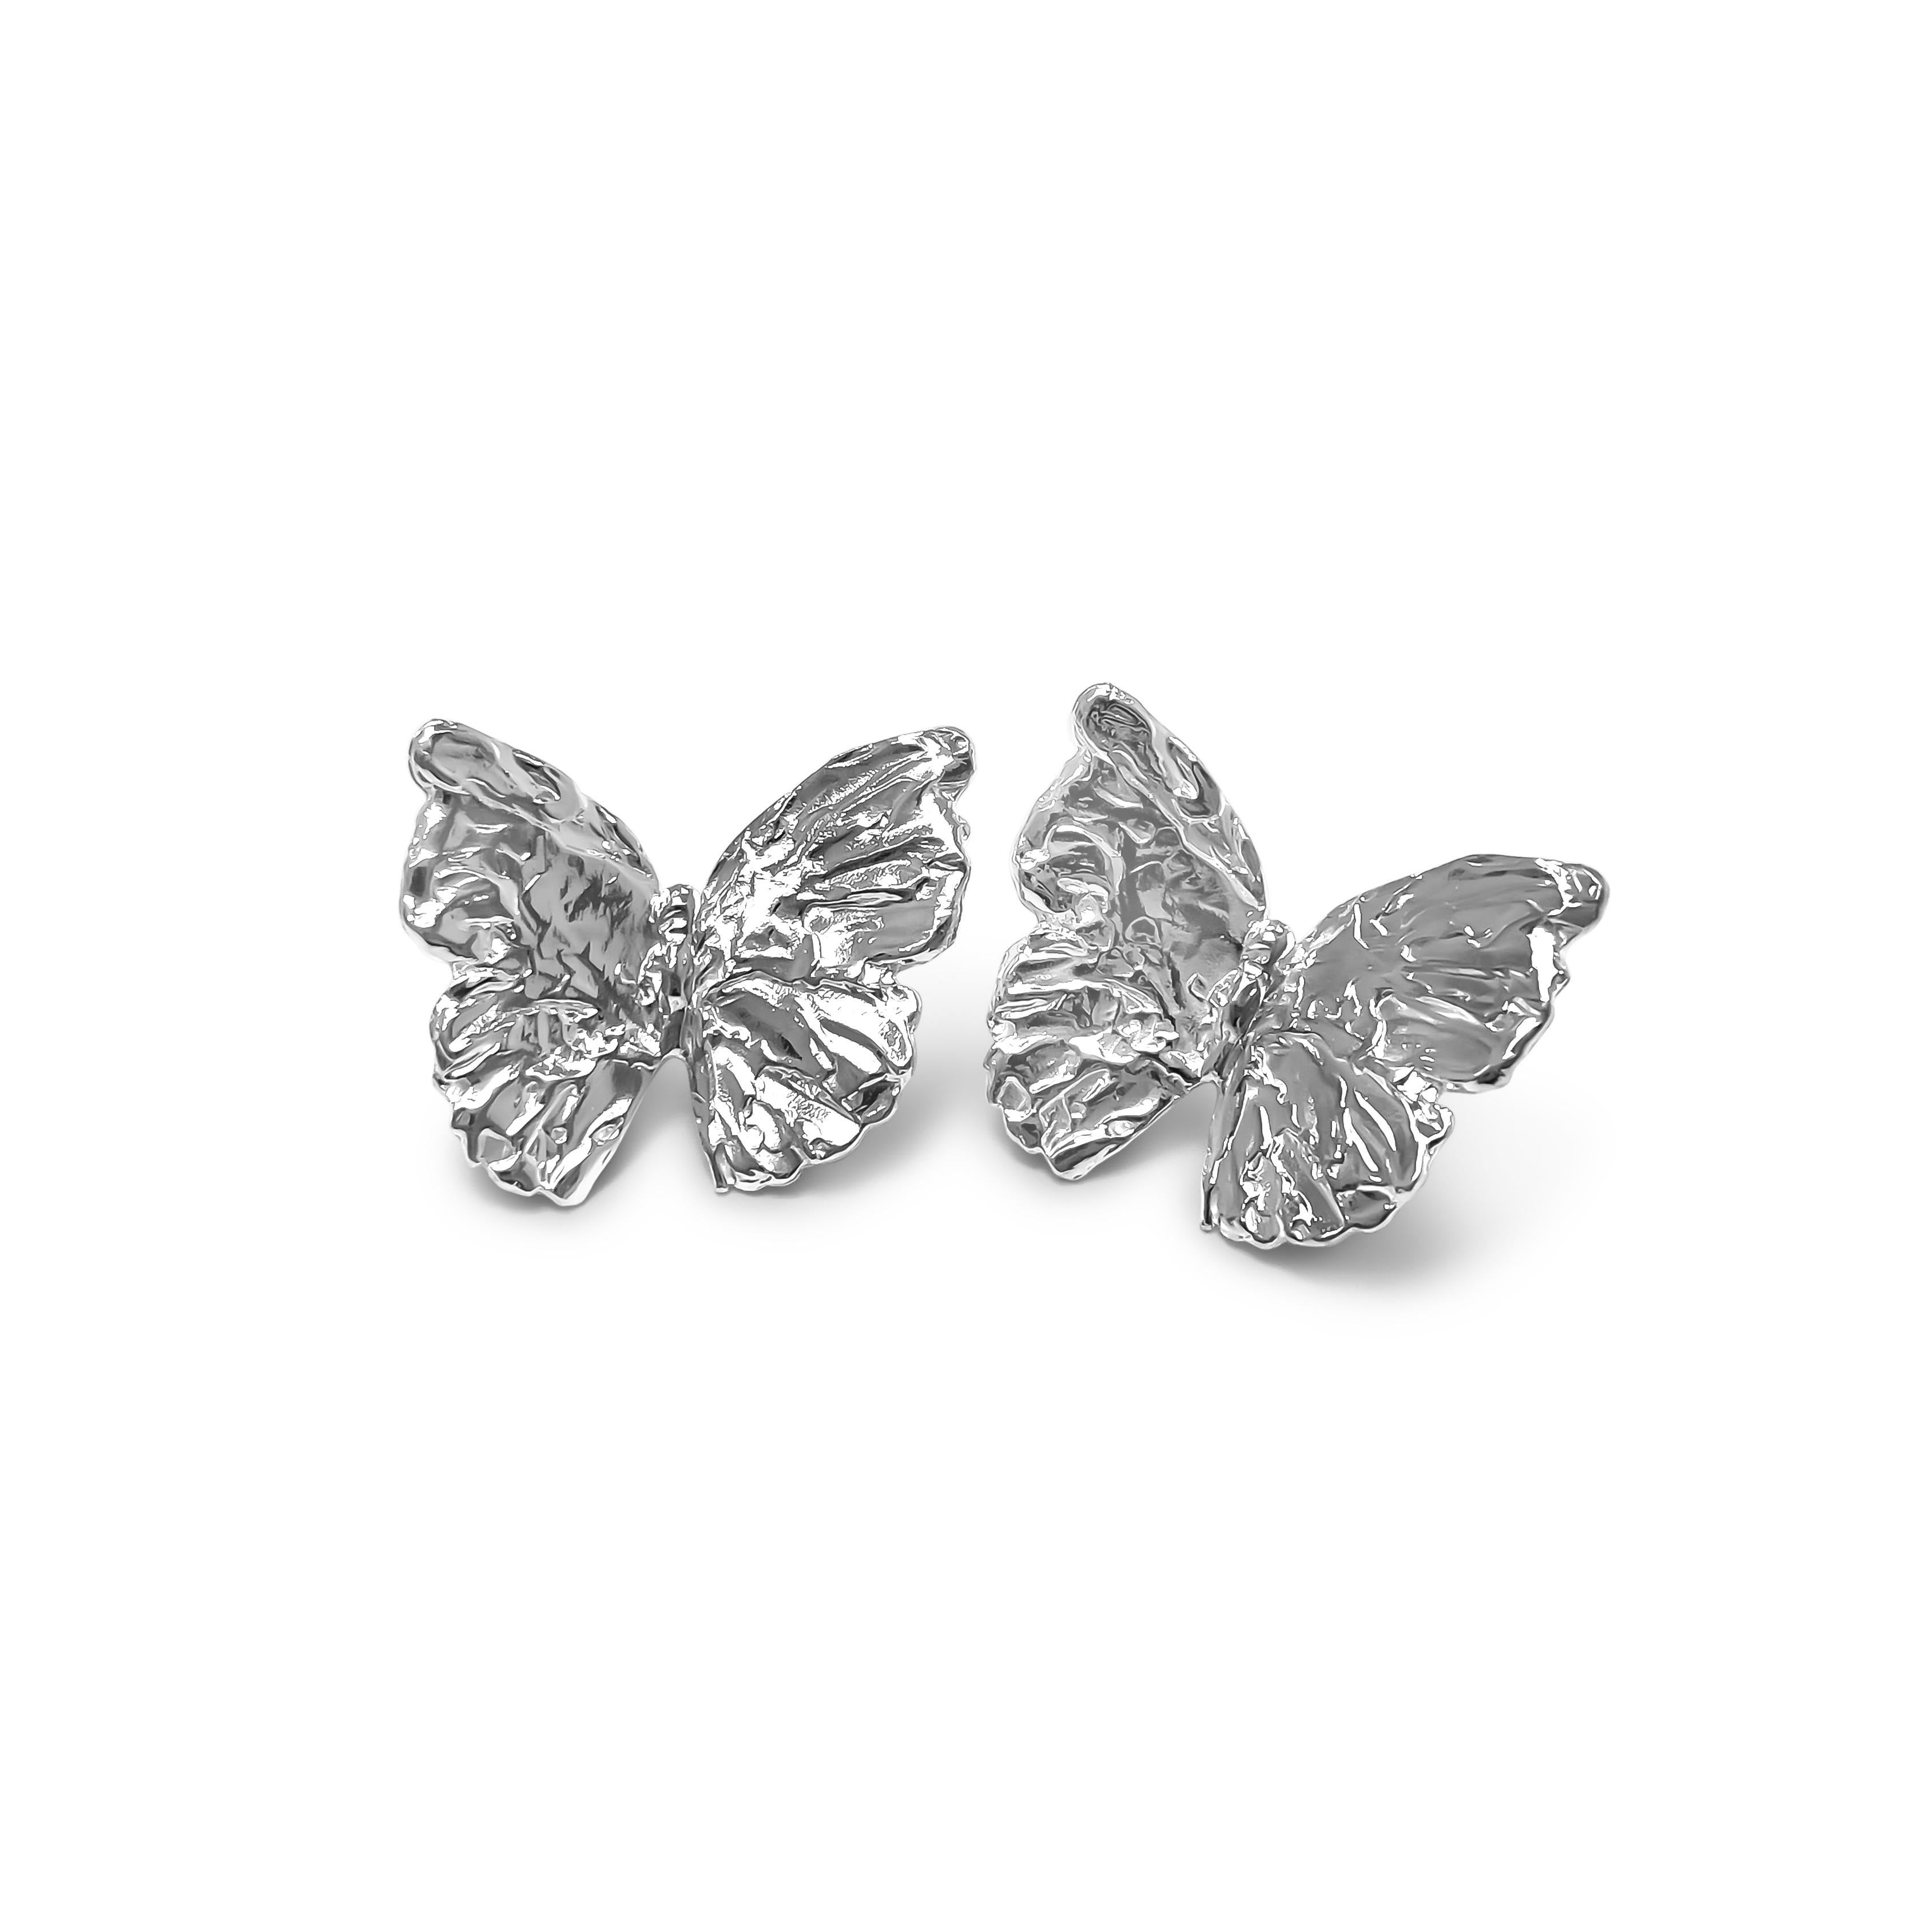 Intention: Attention to Detail

Design: These handcrafted earrings, part of our BELIEVE collection, which celebrates the powerful belief of the nascent butterfly, is an ode to texture. Gently framing the face, these hopeful charmers catch every